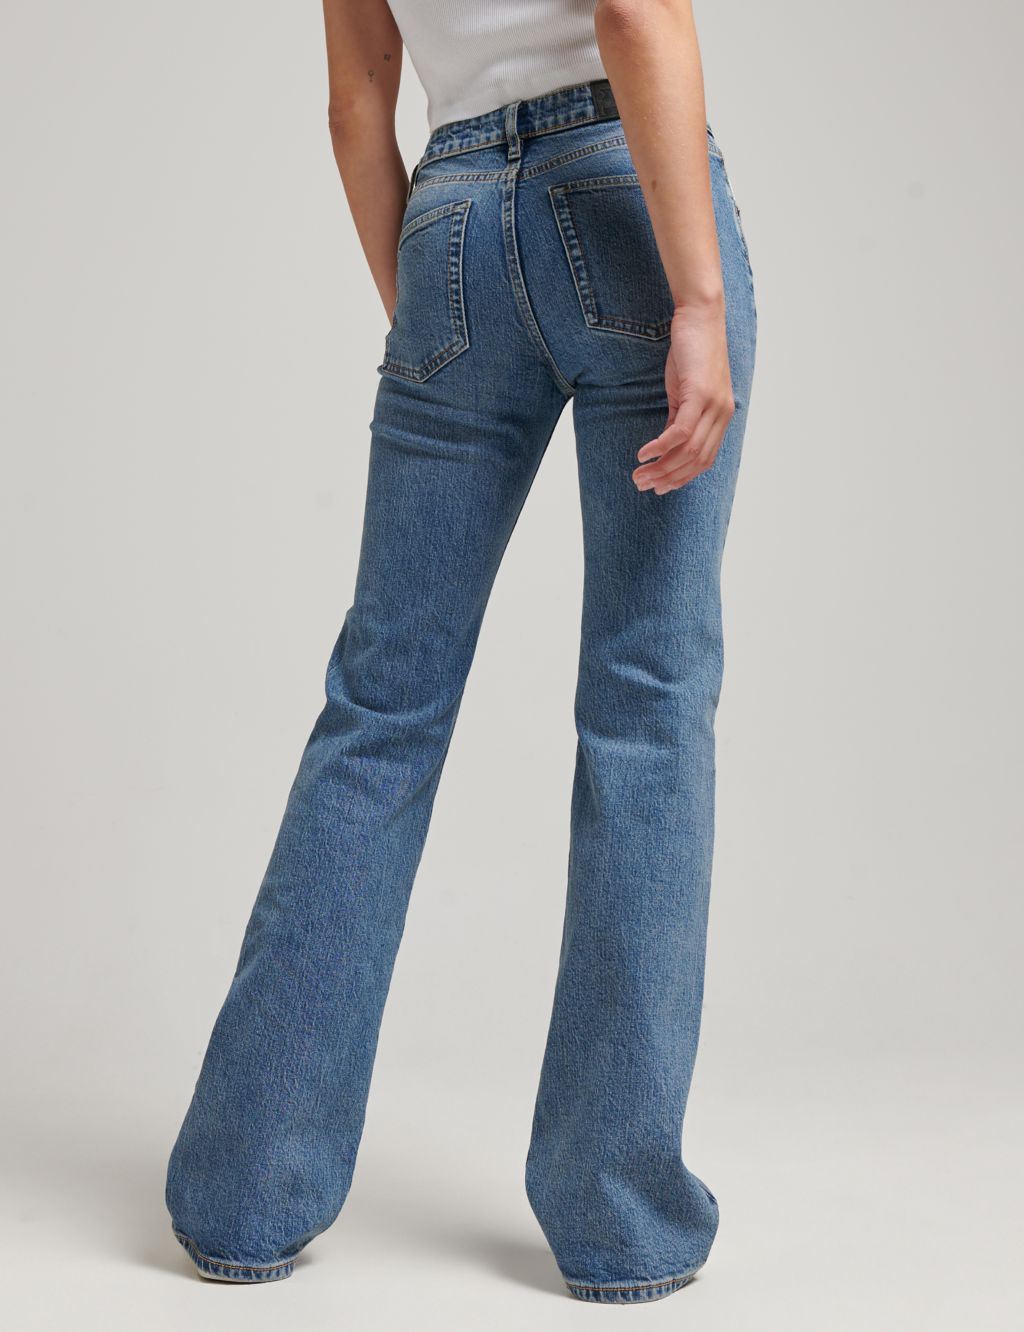 Flared Jeans image 3